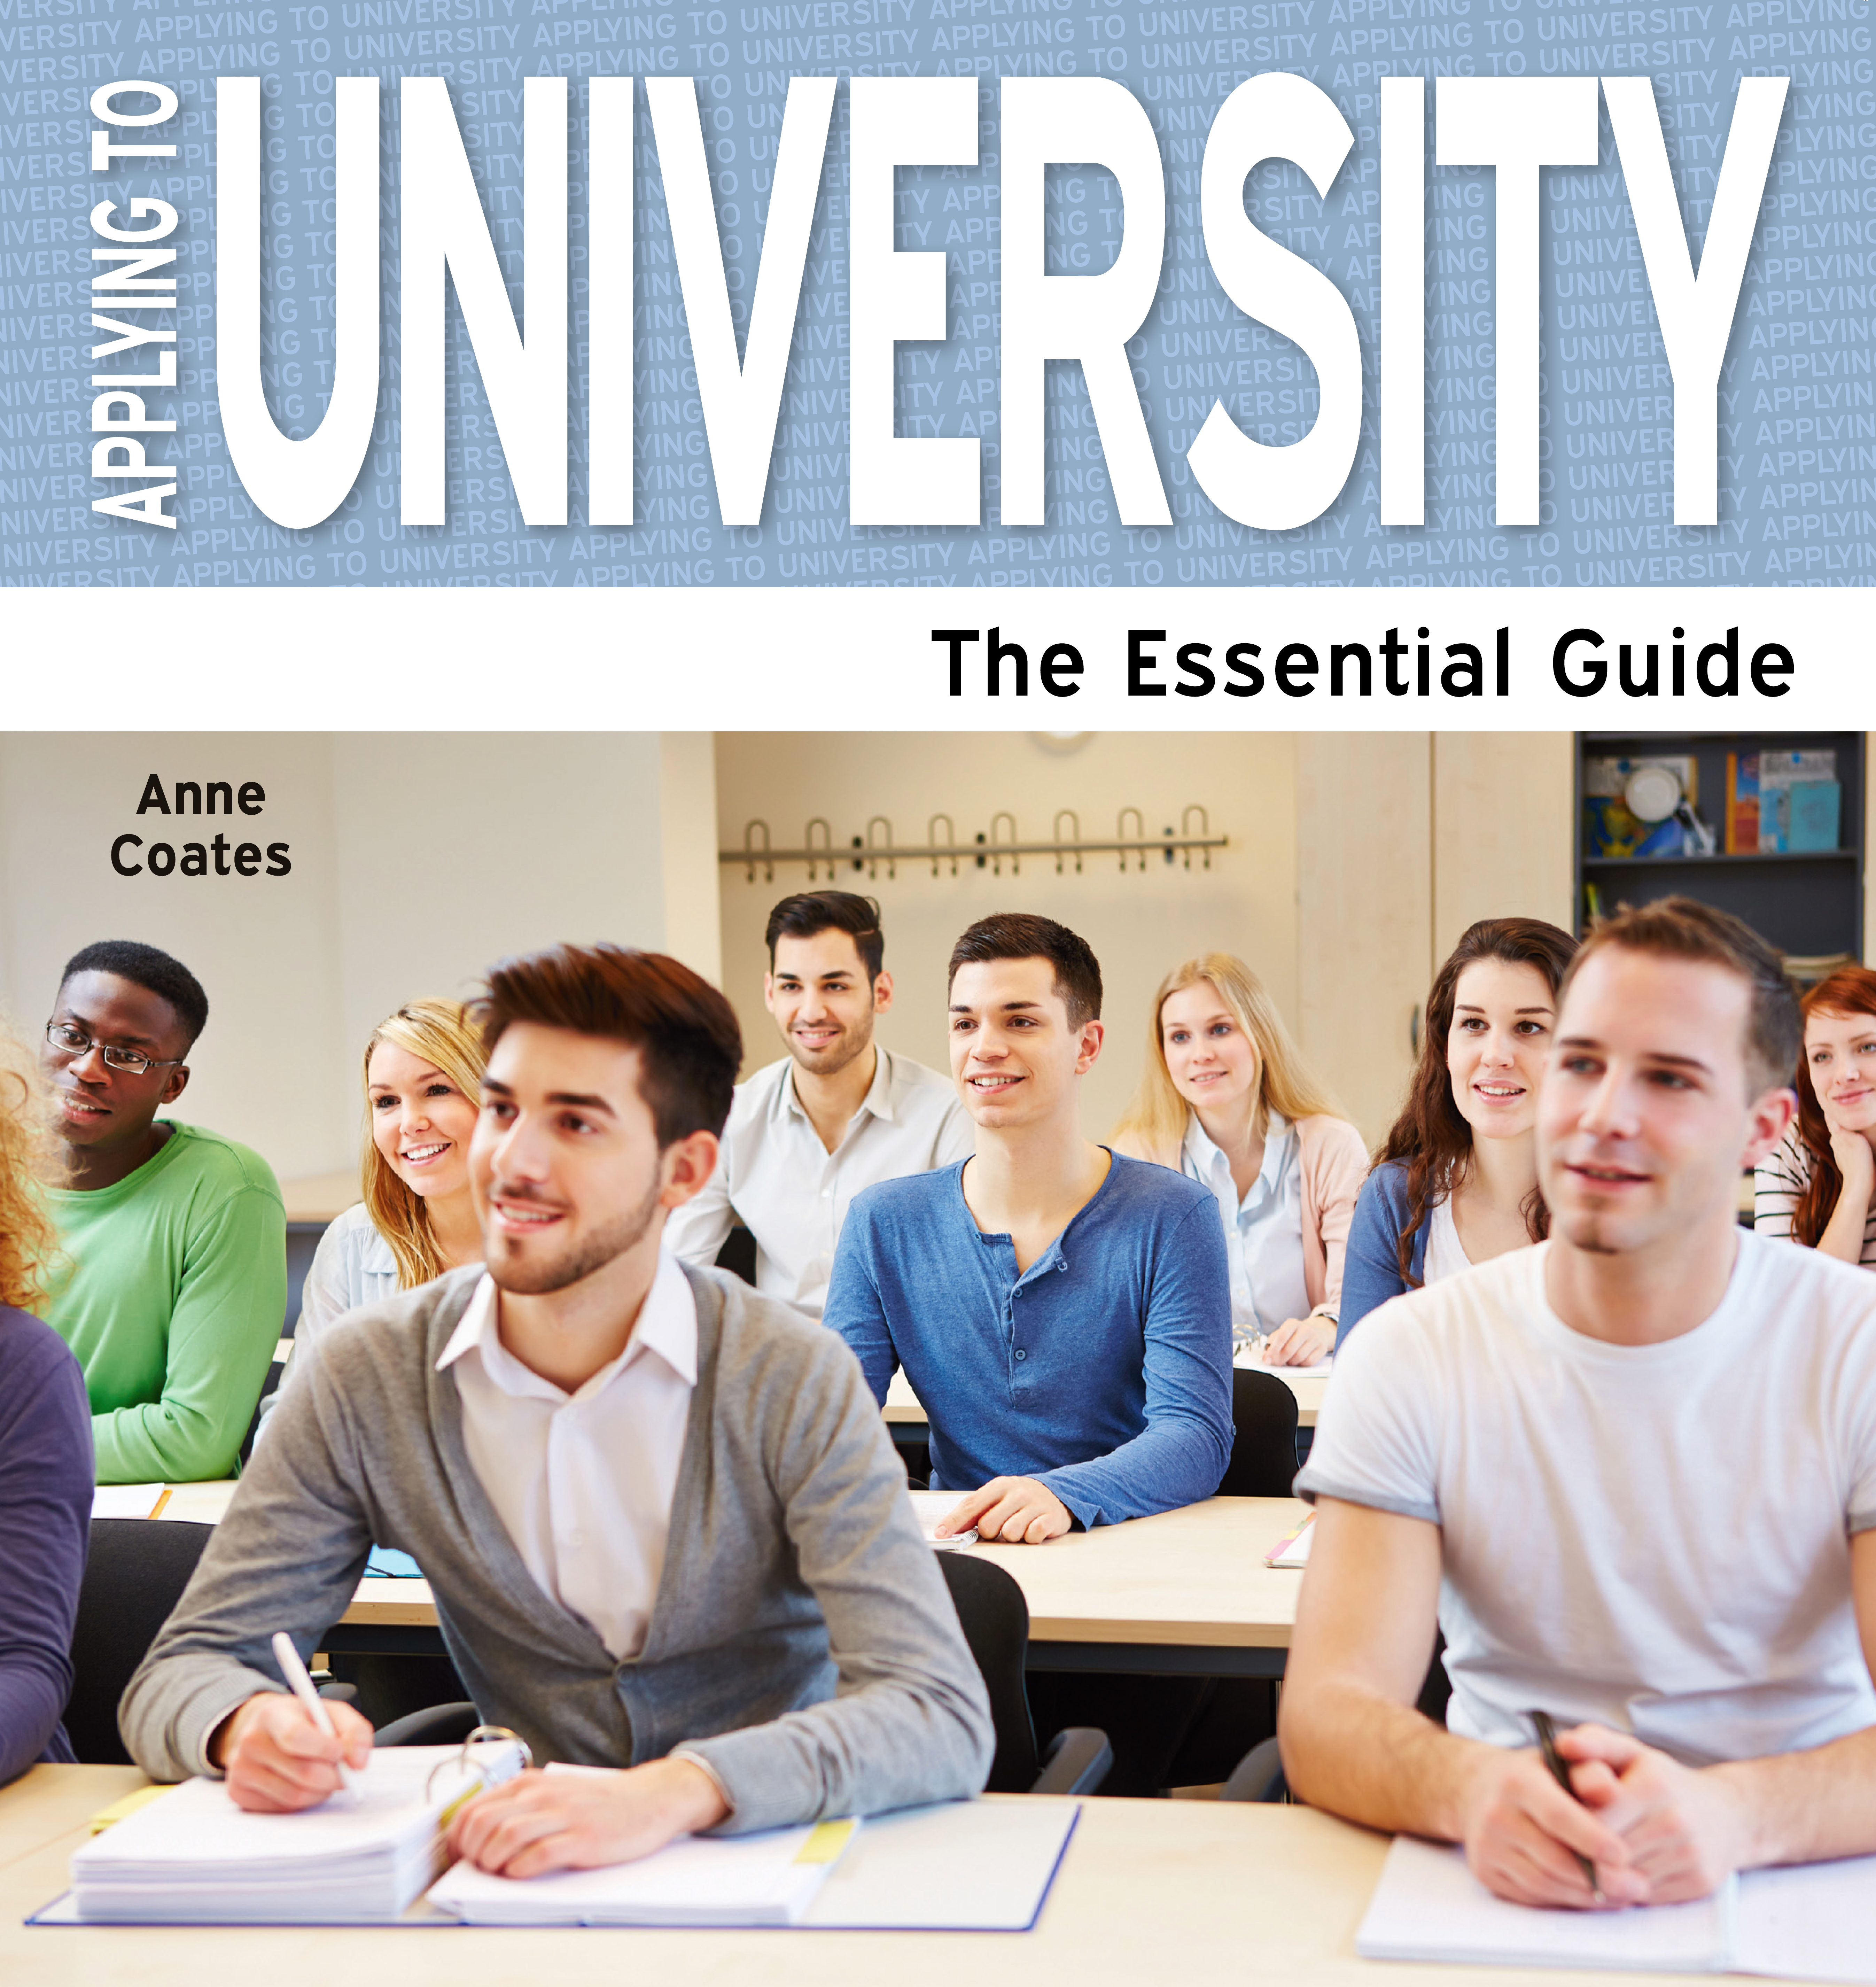 Applying to University The Essential Guide by Anne Coates